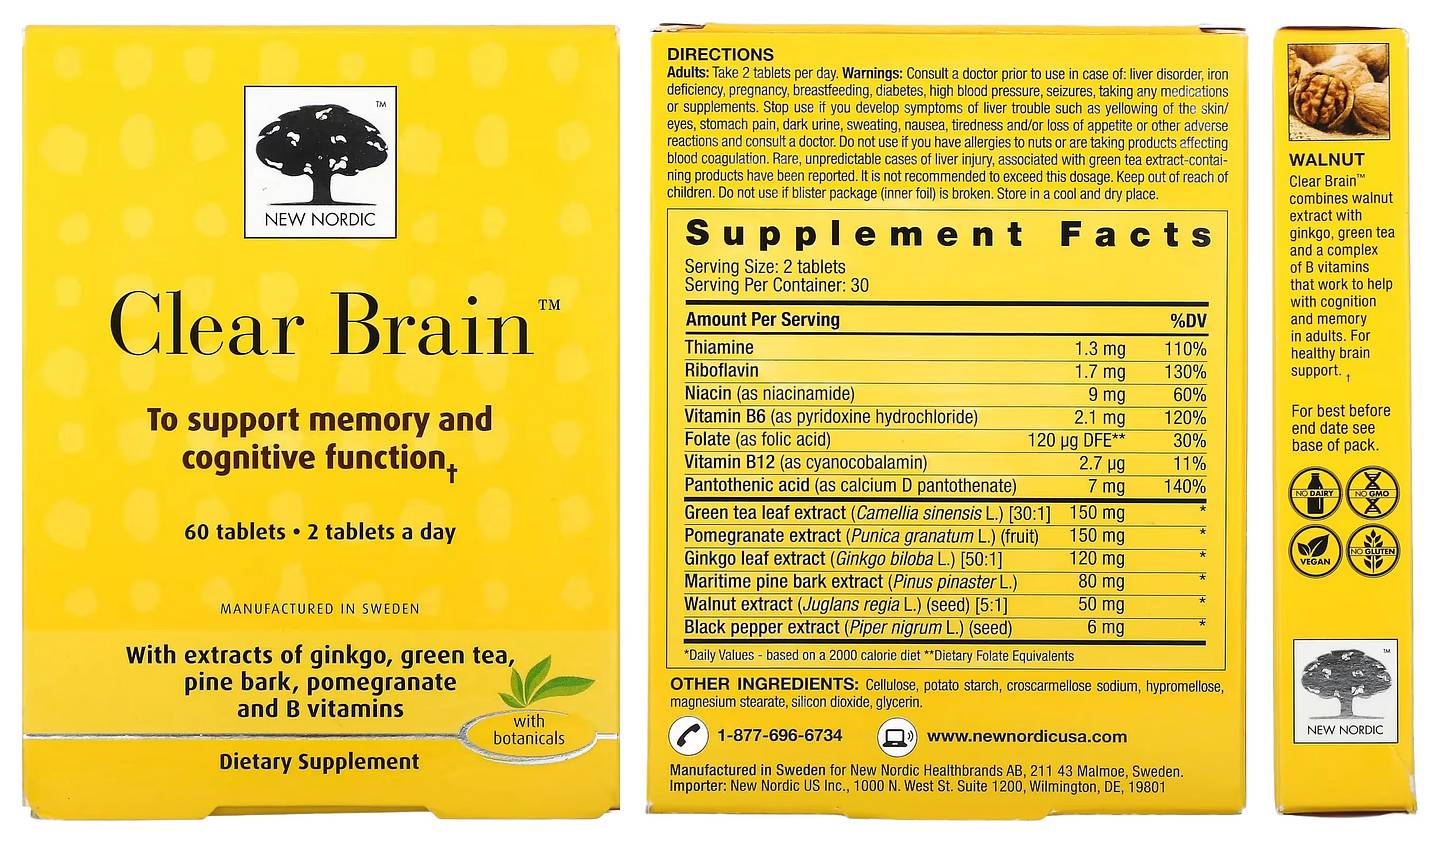 New Nordic, Clear Brain packaging